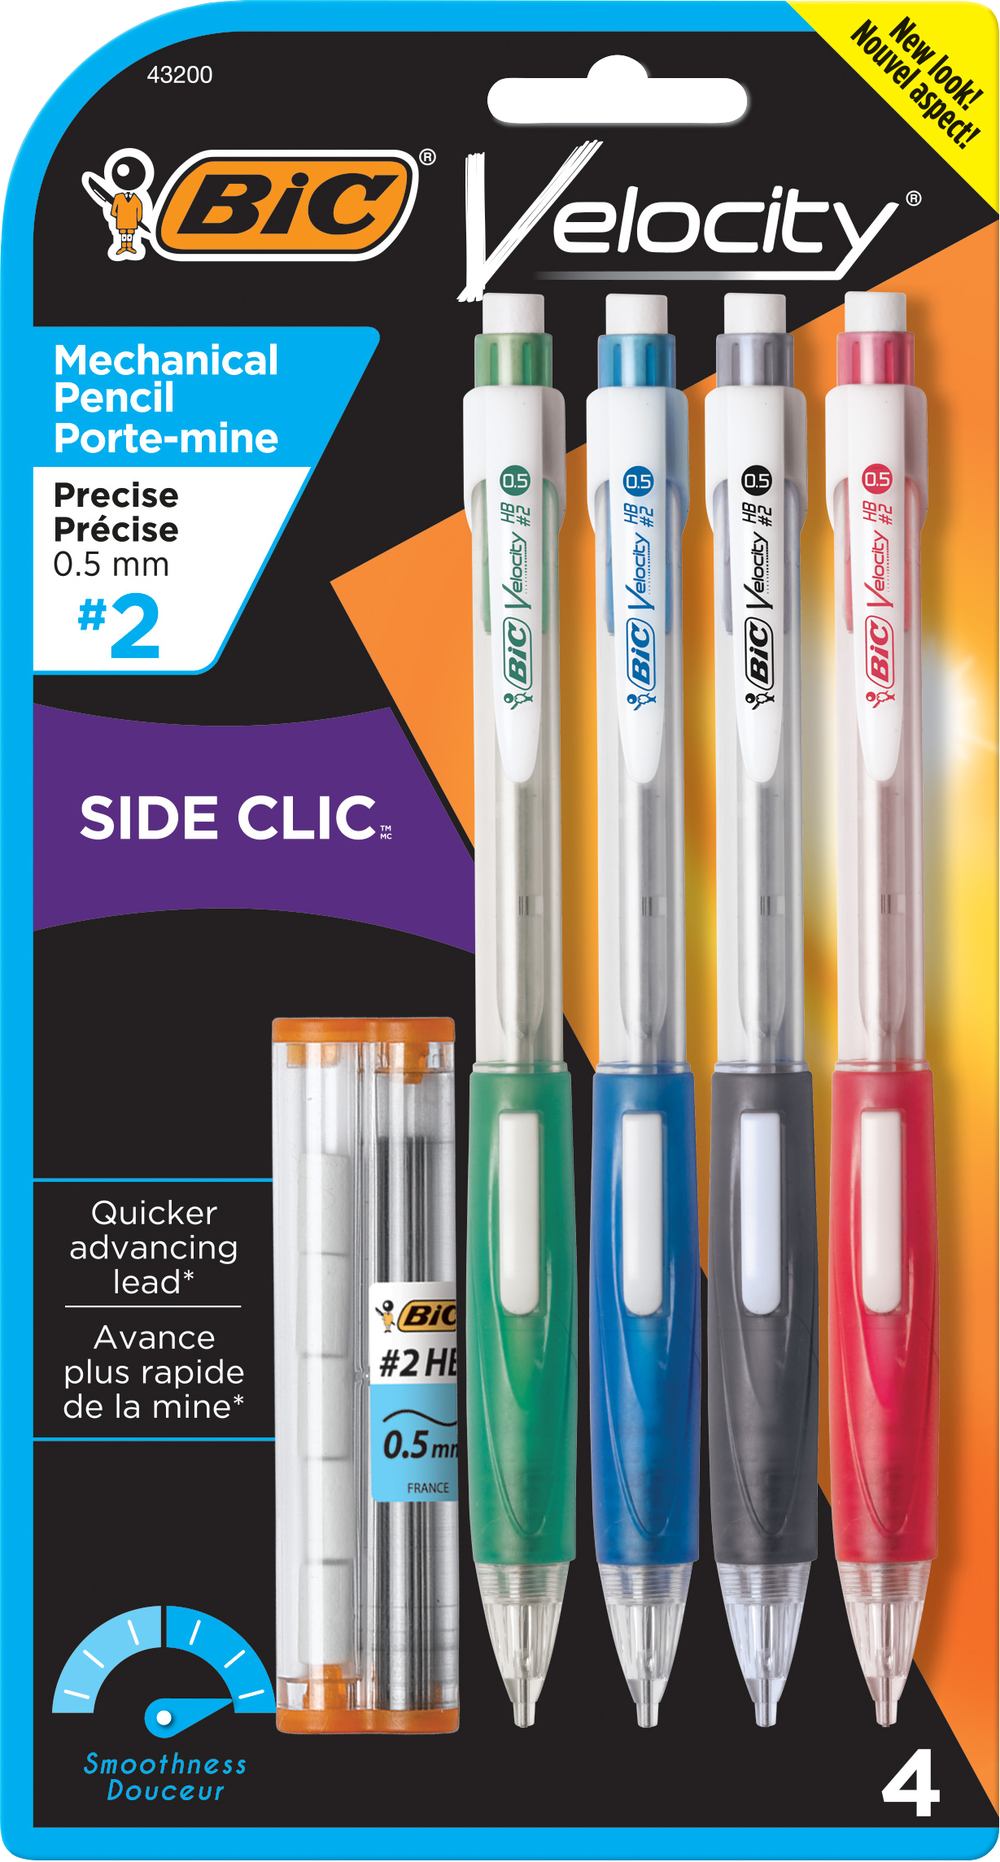 BIC Velocity Side Clic Mechanical Pencil, Fine Point (0.5mm), 4-Count